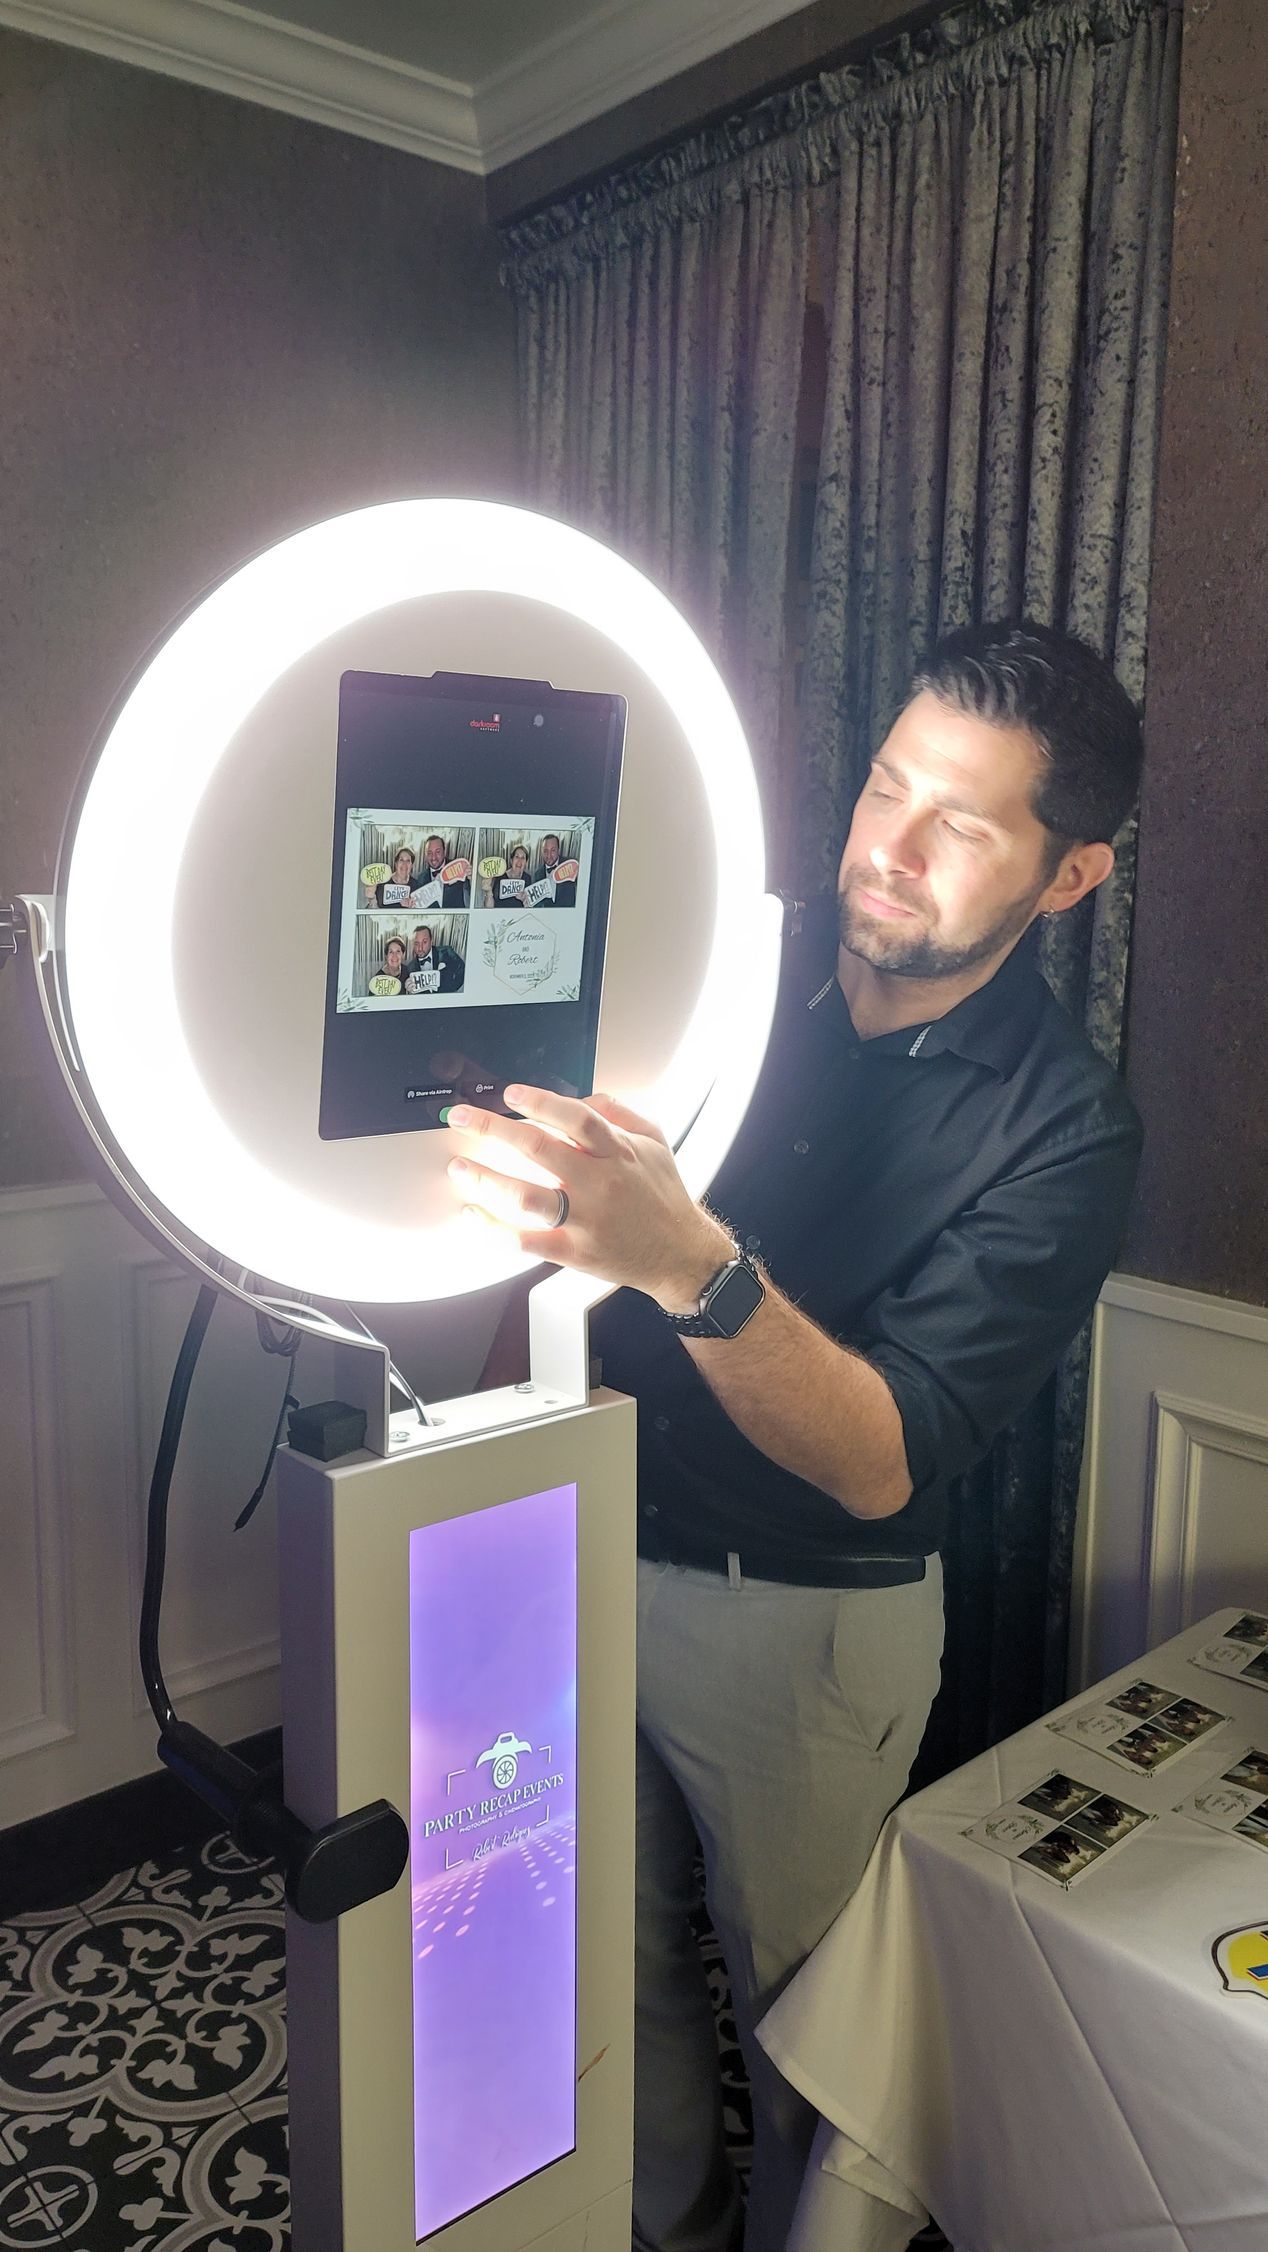 ipad photo booth, photo booth, red carpet, mirror booth, spin booth